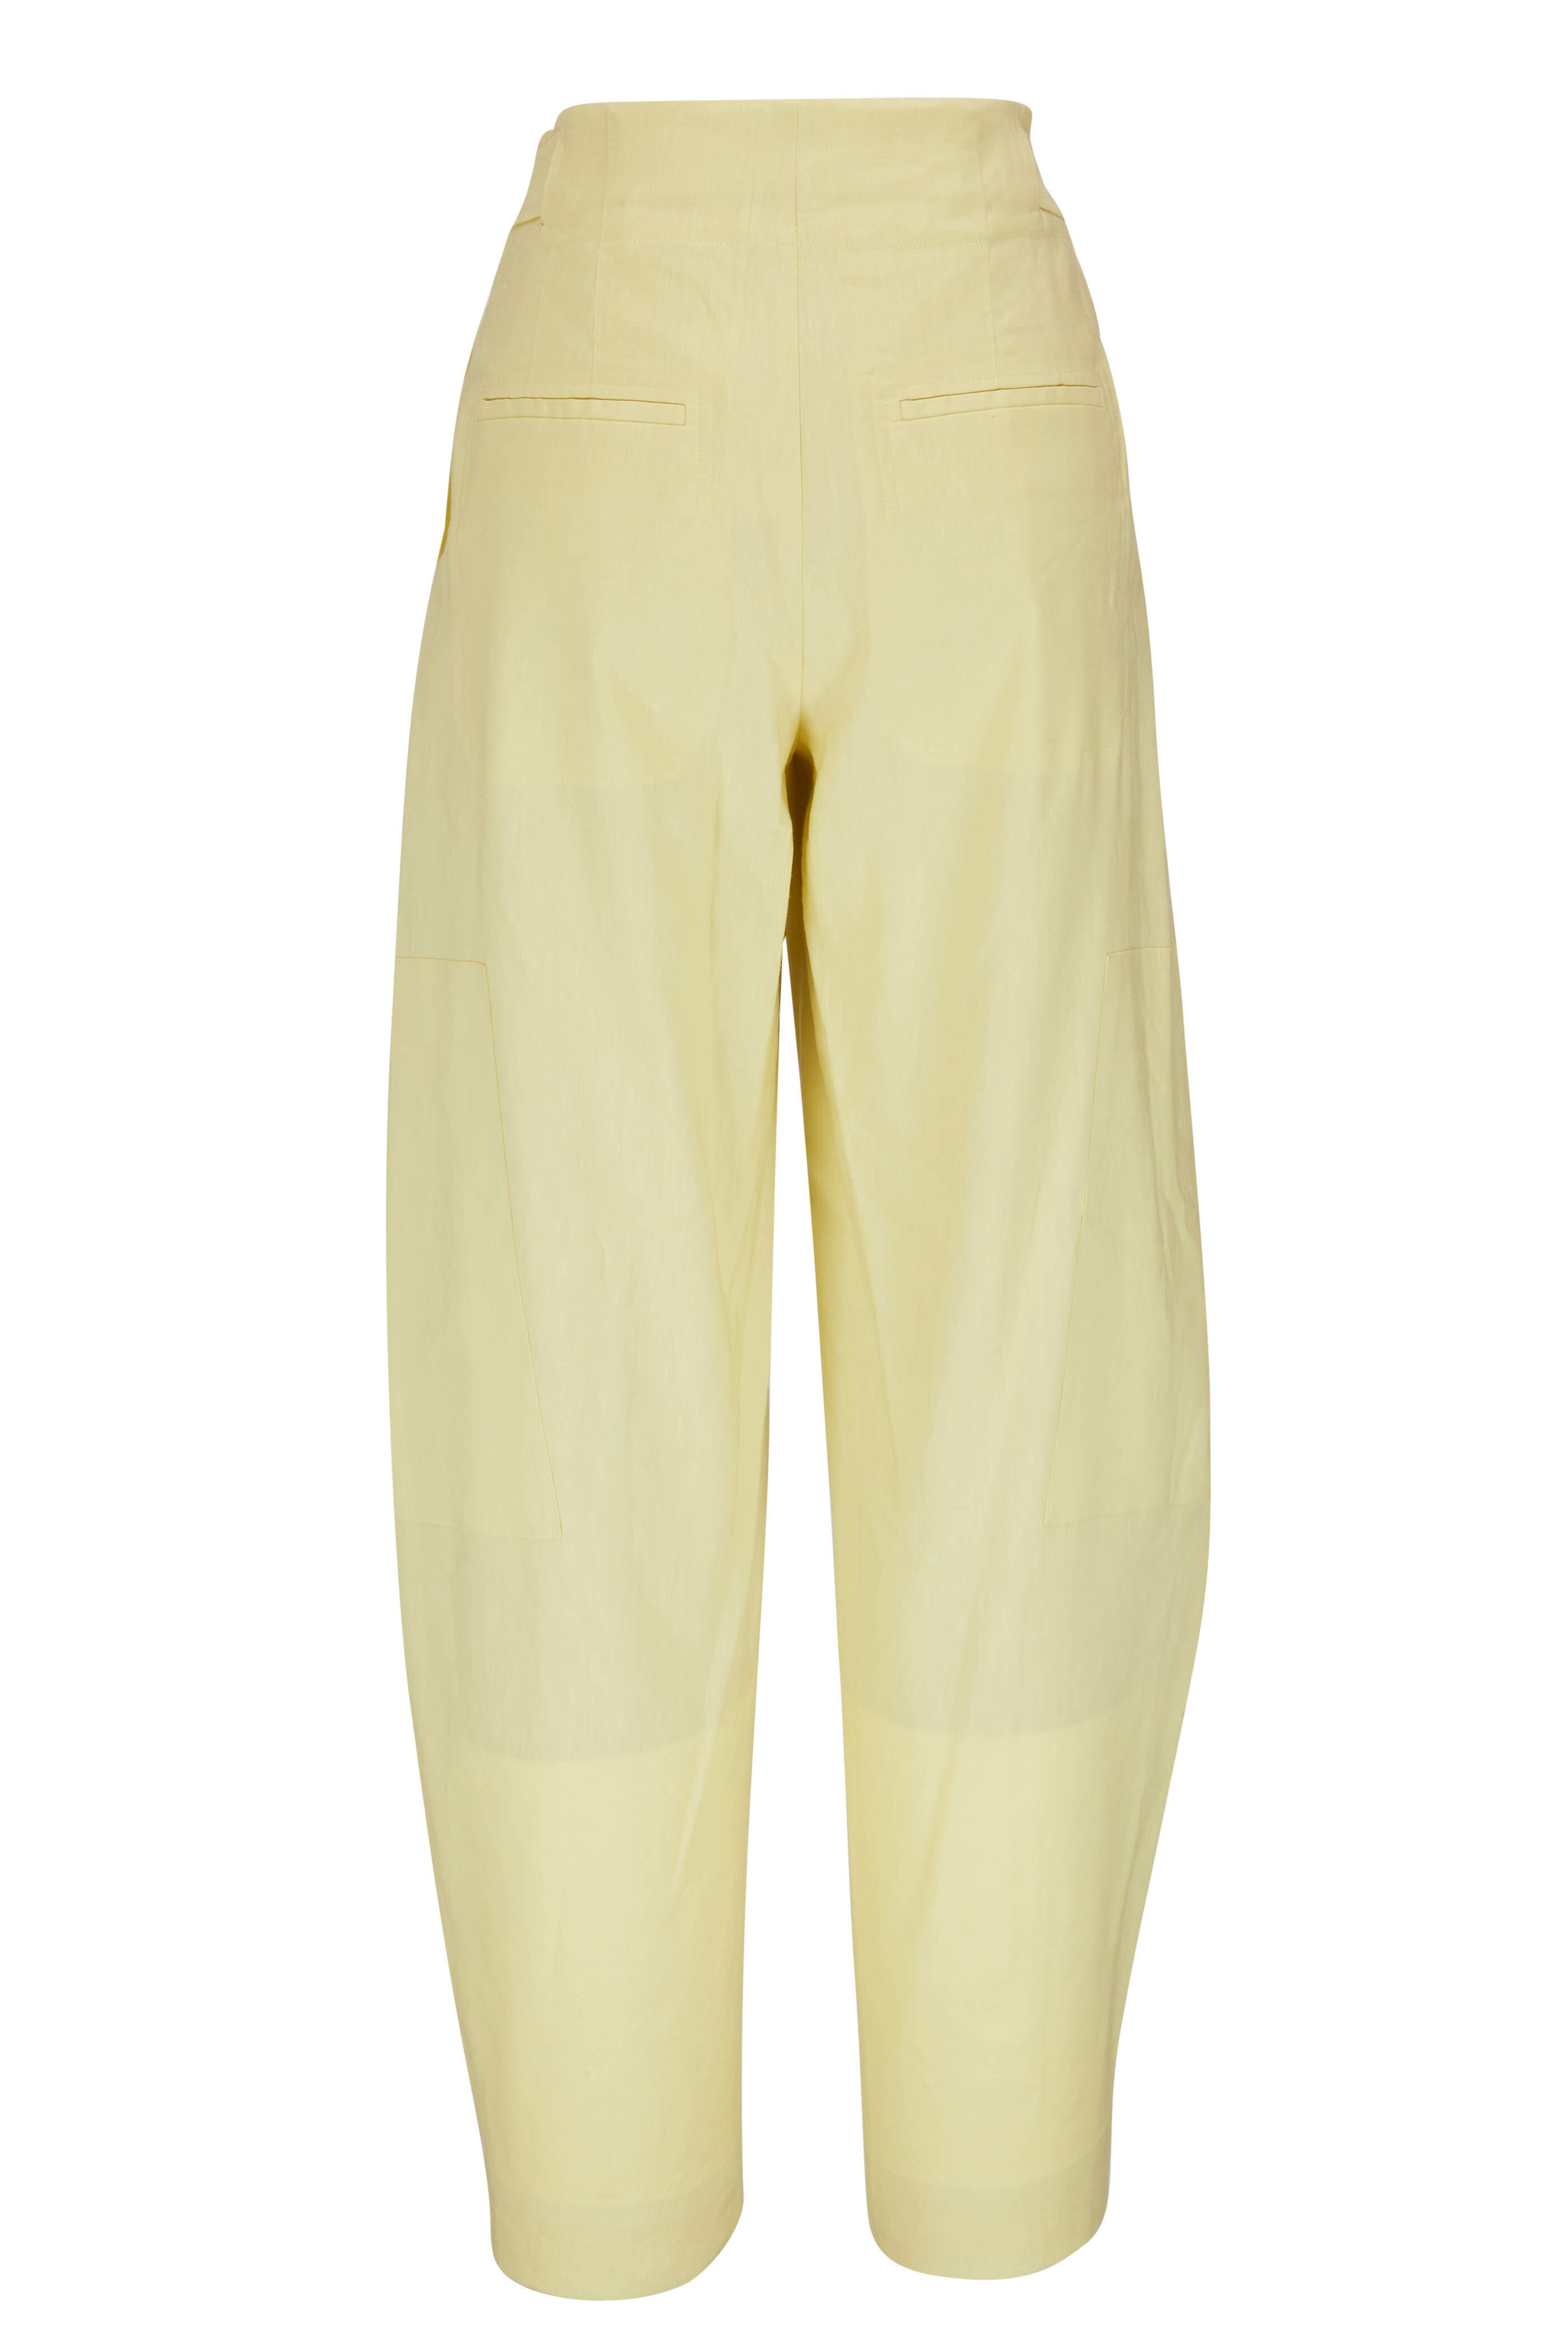 Vince - Pomelo Yellow High-Rise Utility Pant | Mitchell Stores